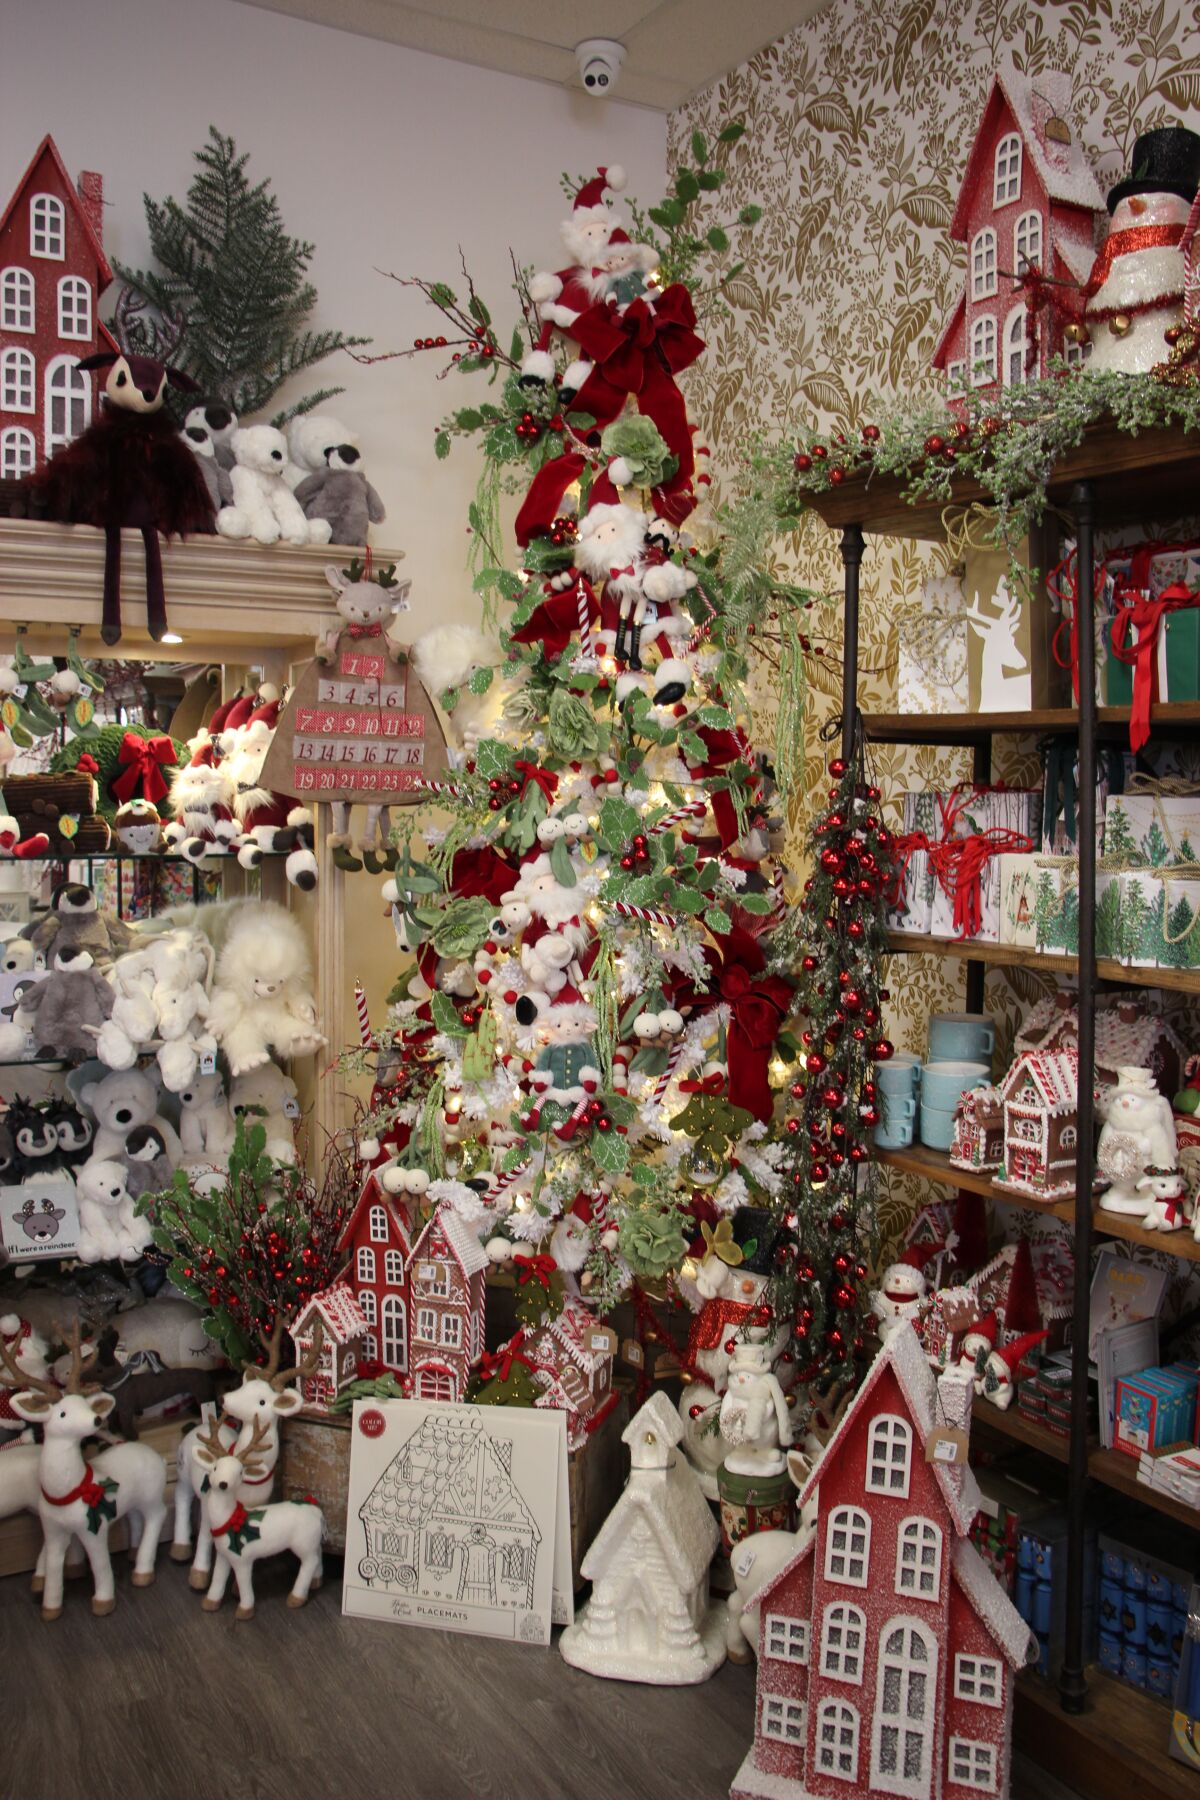 Merchandise from Floral Palette will be among the items available at the Dec. 9 holiday bazaar.